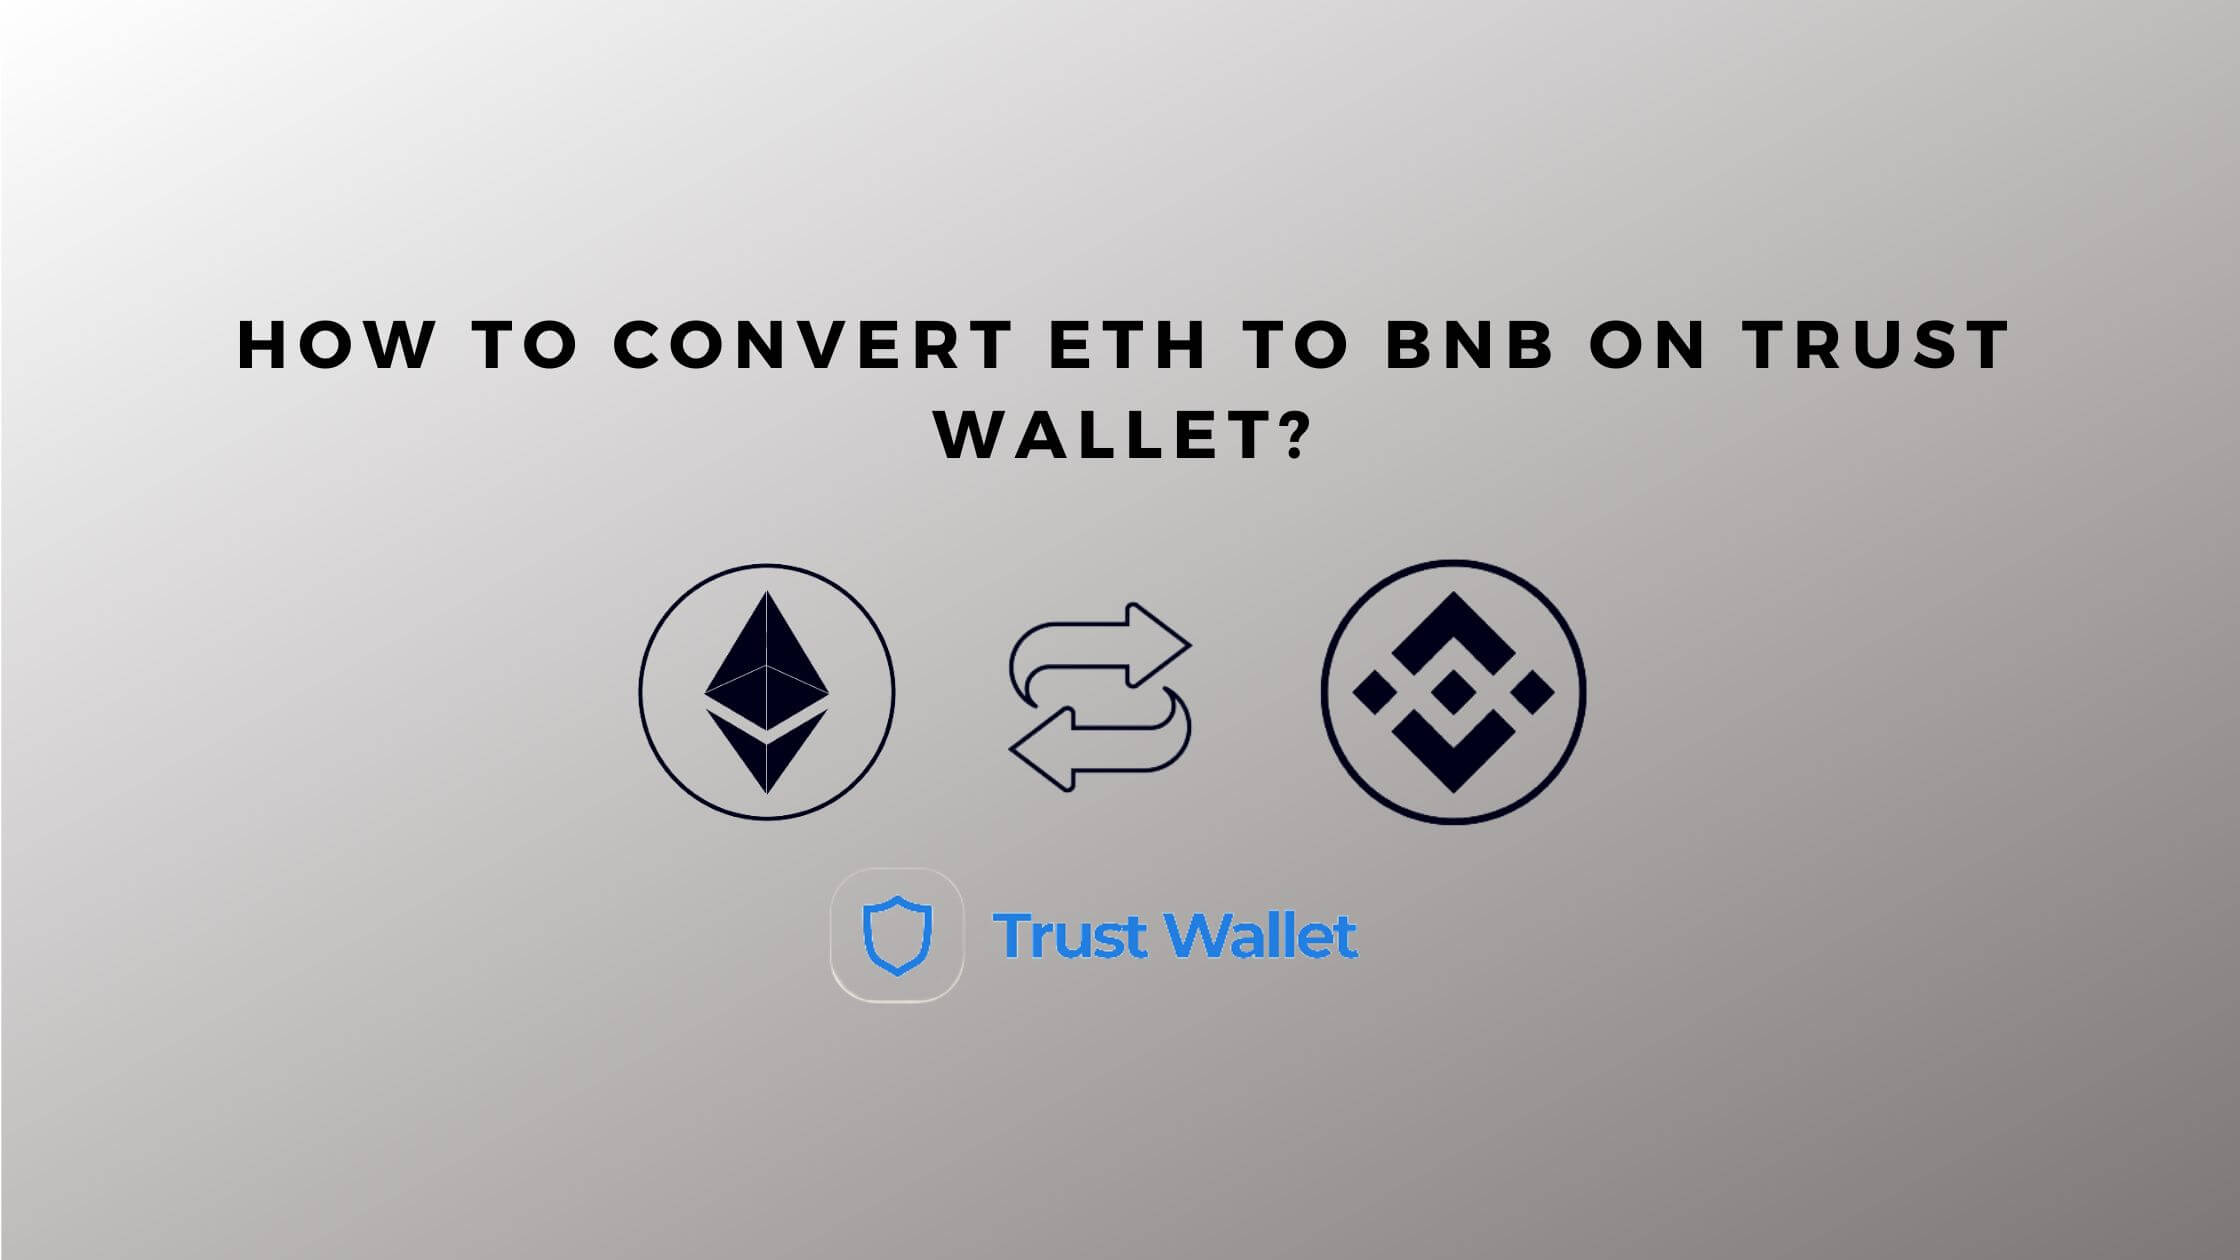 How To Convert ETH To BNB On Trust Wallet